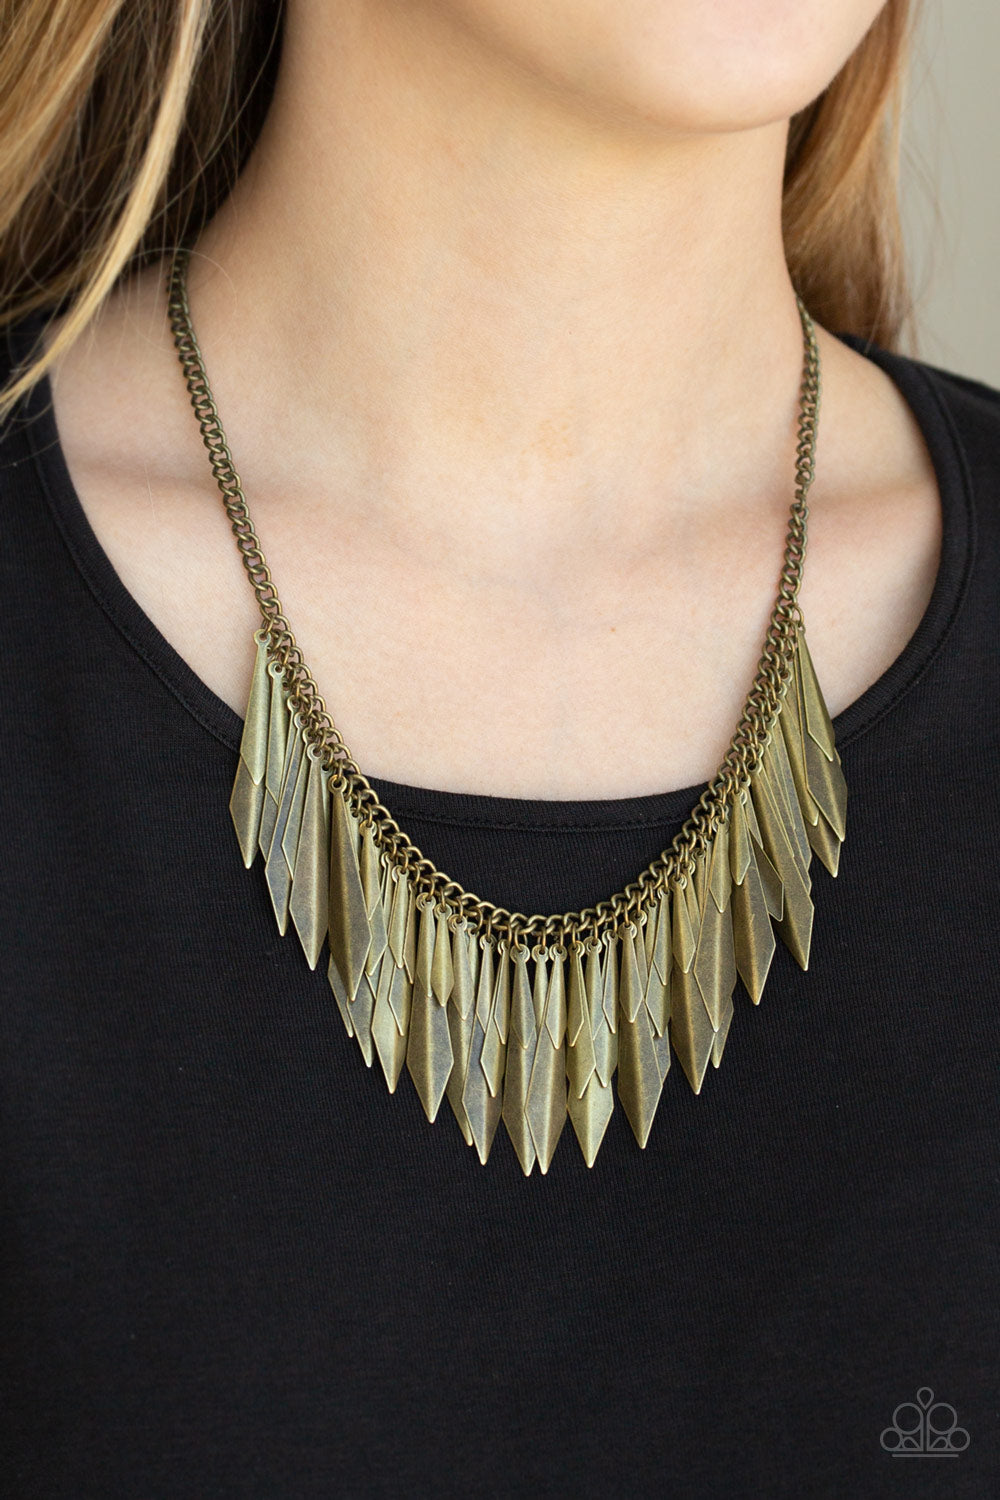 Paparazzi Jewelry & Accessories - The Thrill Seeker - Brass Necklace. Bling By Titia Boutique